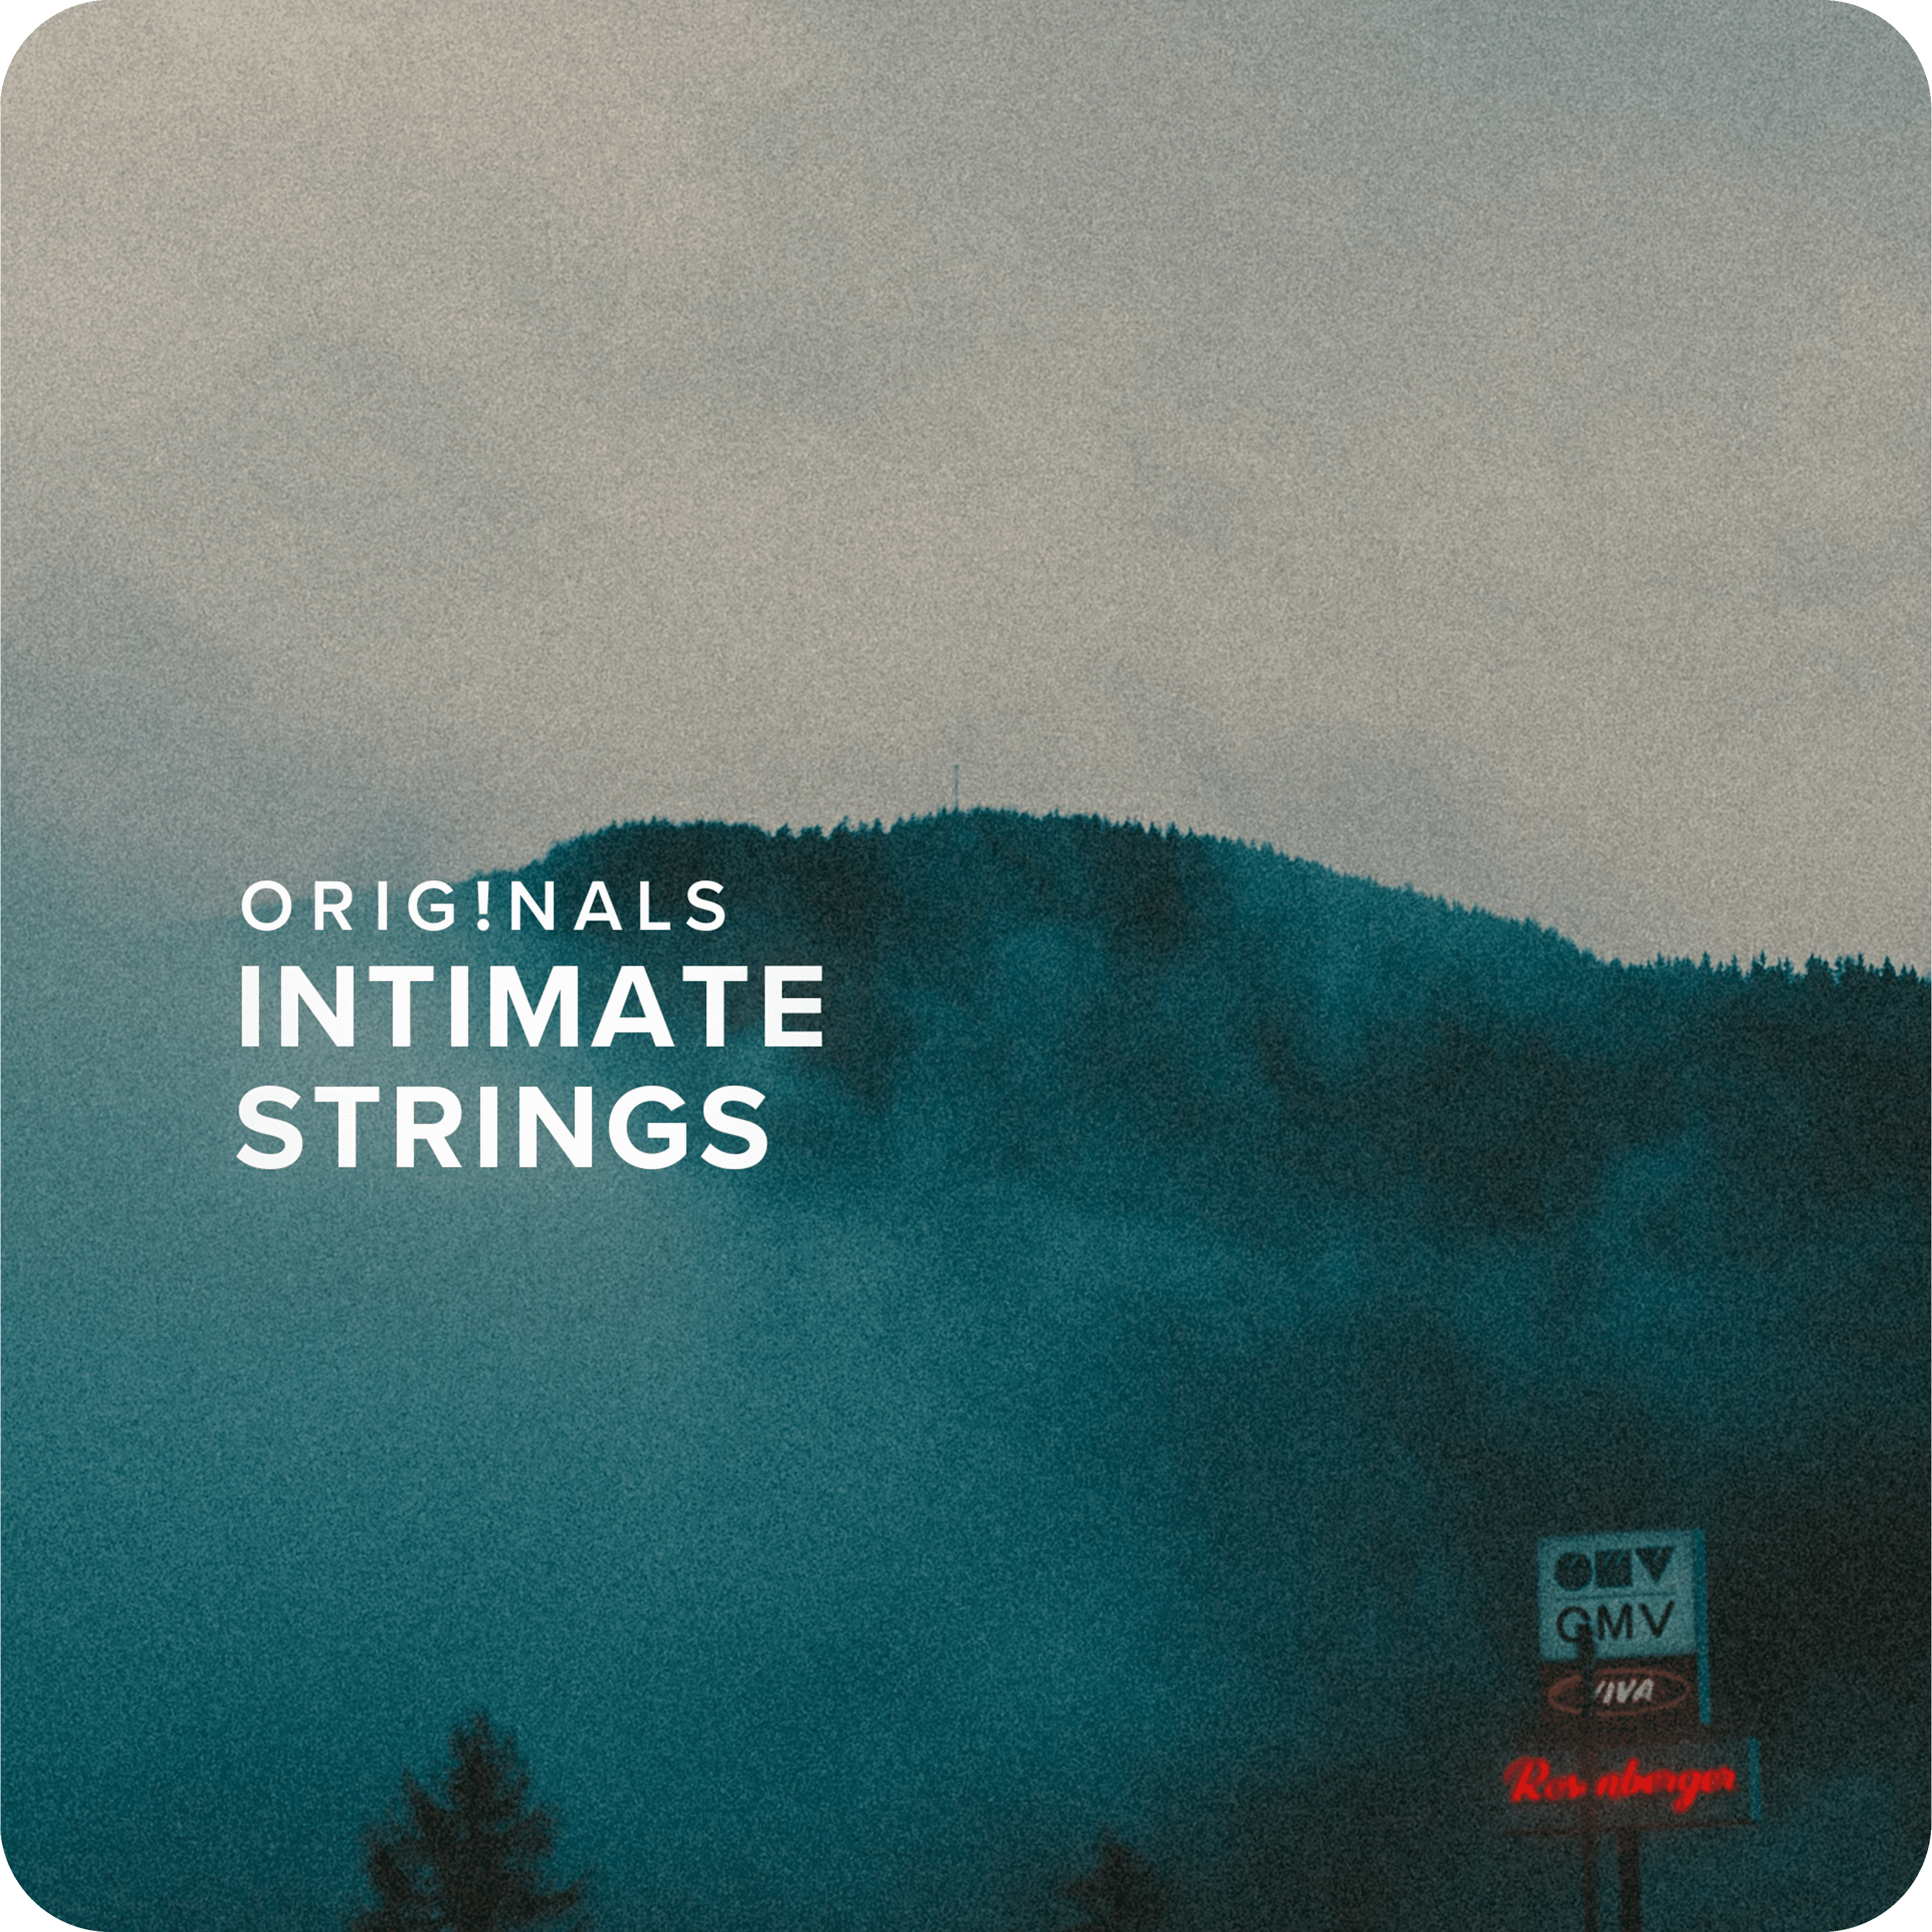 Originals Intimate Strings by Spitfire Audios0416 square 1